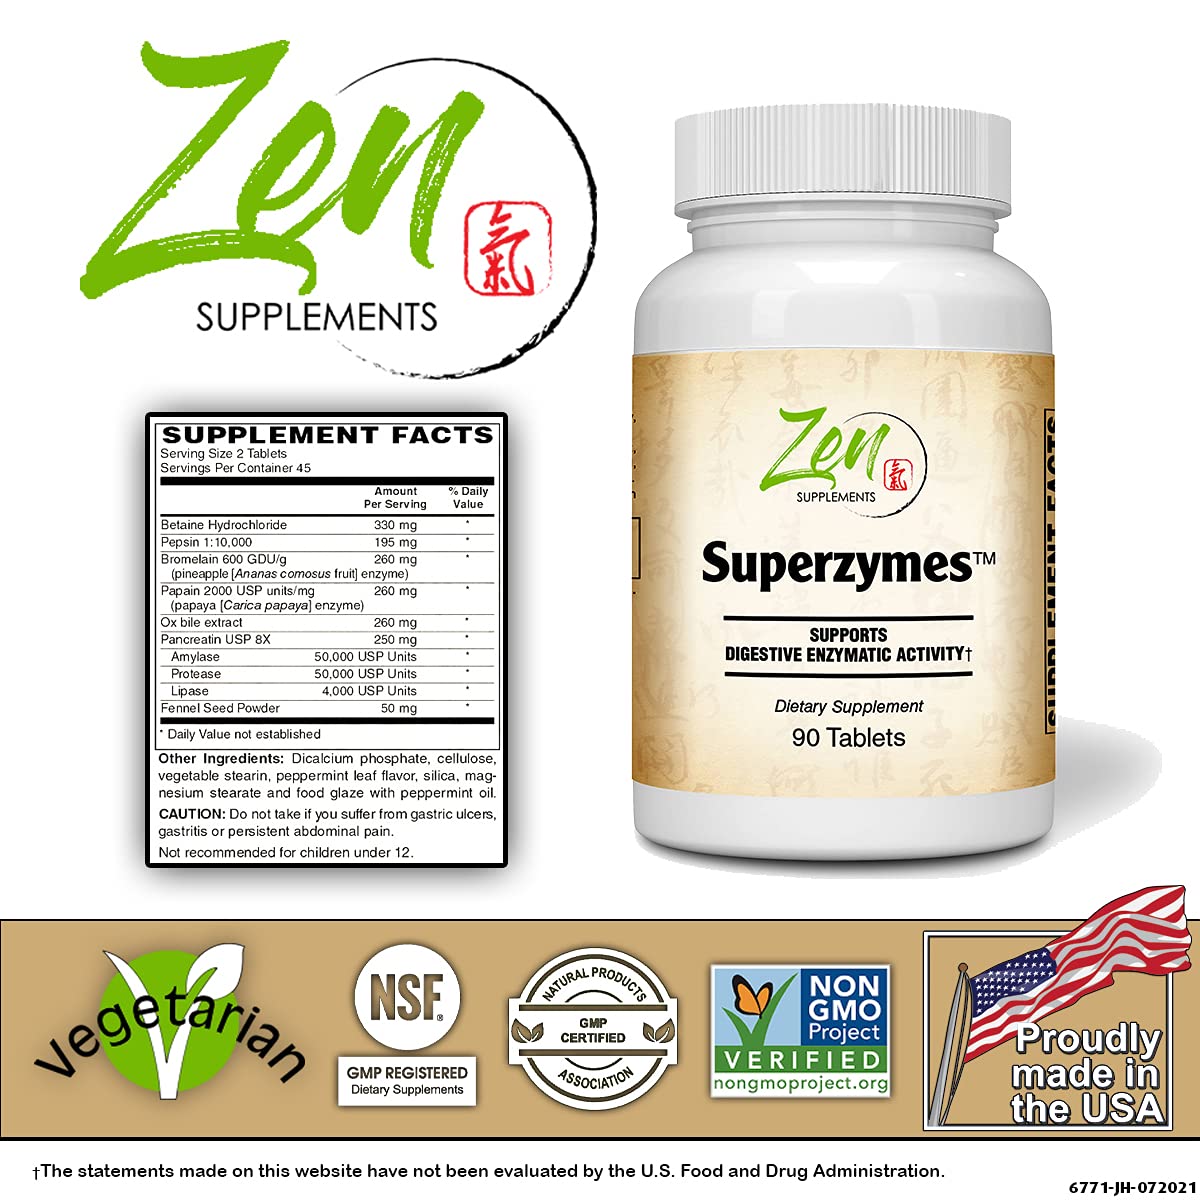 Zen Supplements - Superzymes Zen Supplements - Superzymes Multi-Enzyme Formula containing Pepsin, Bromelain, Papain, Pancreatin, Betaine HCL 90-Tabs